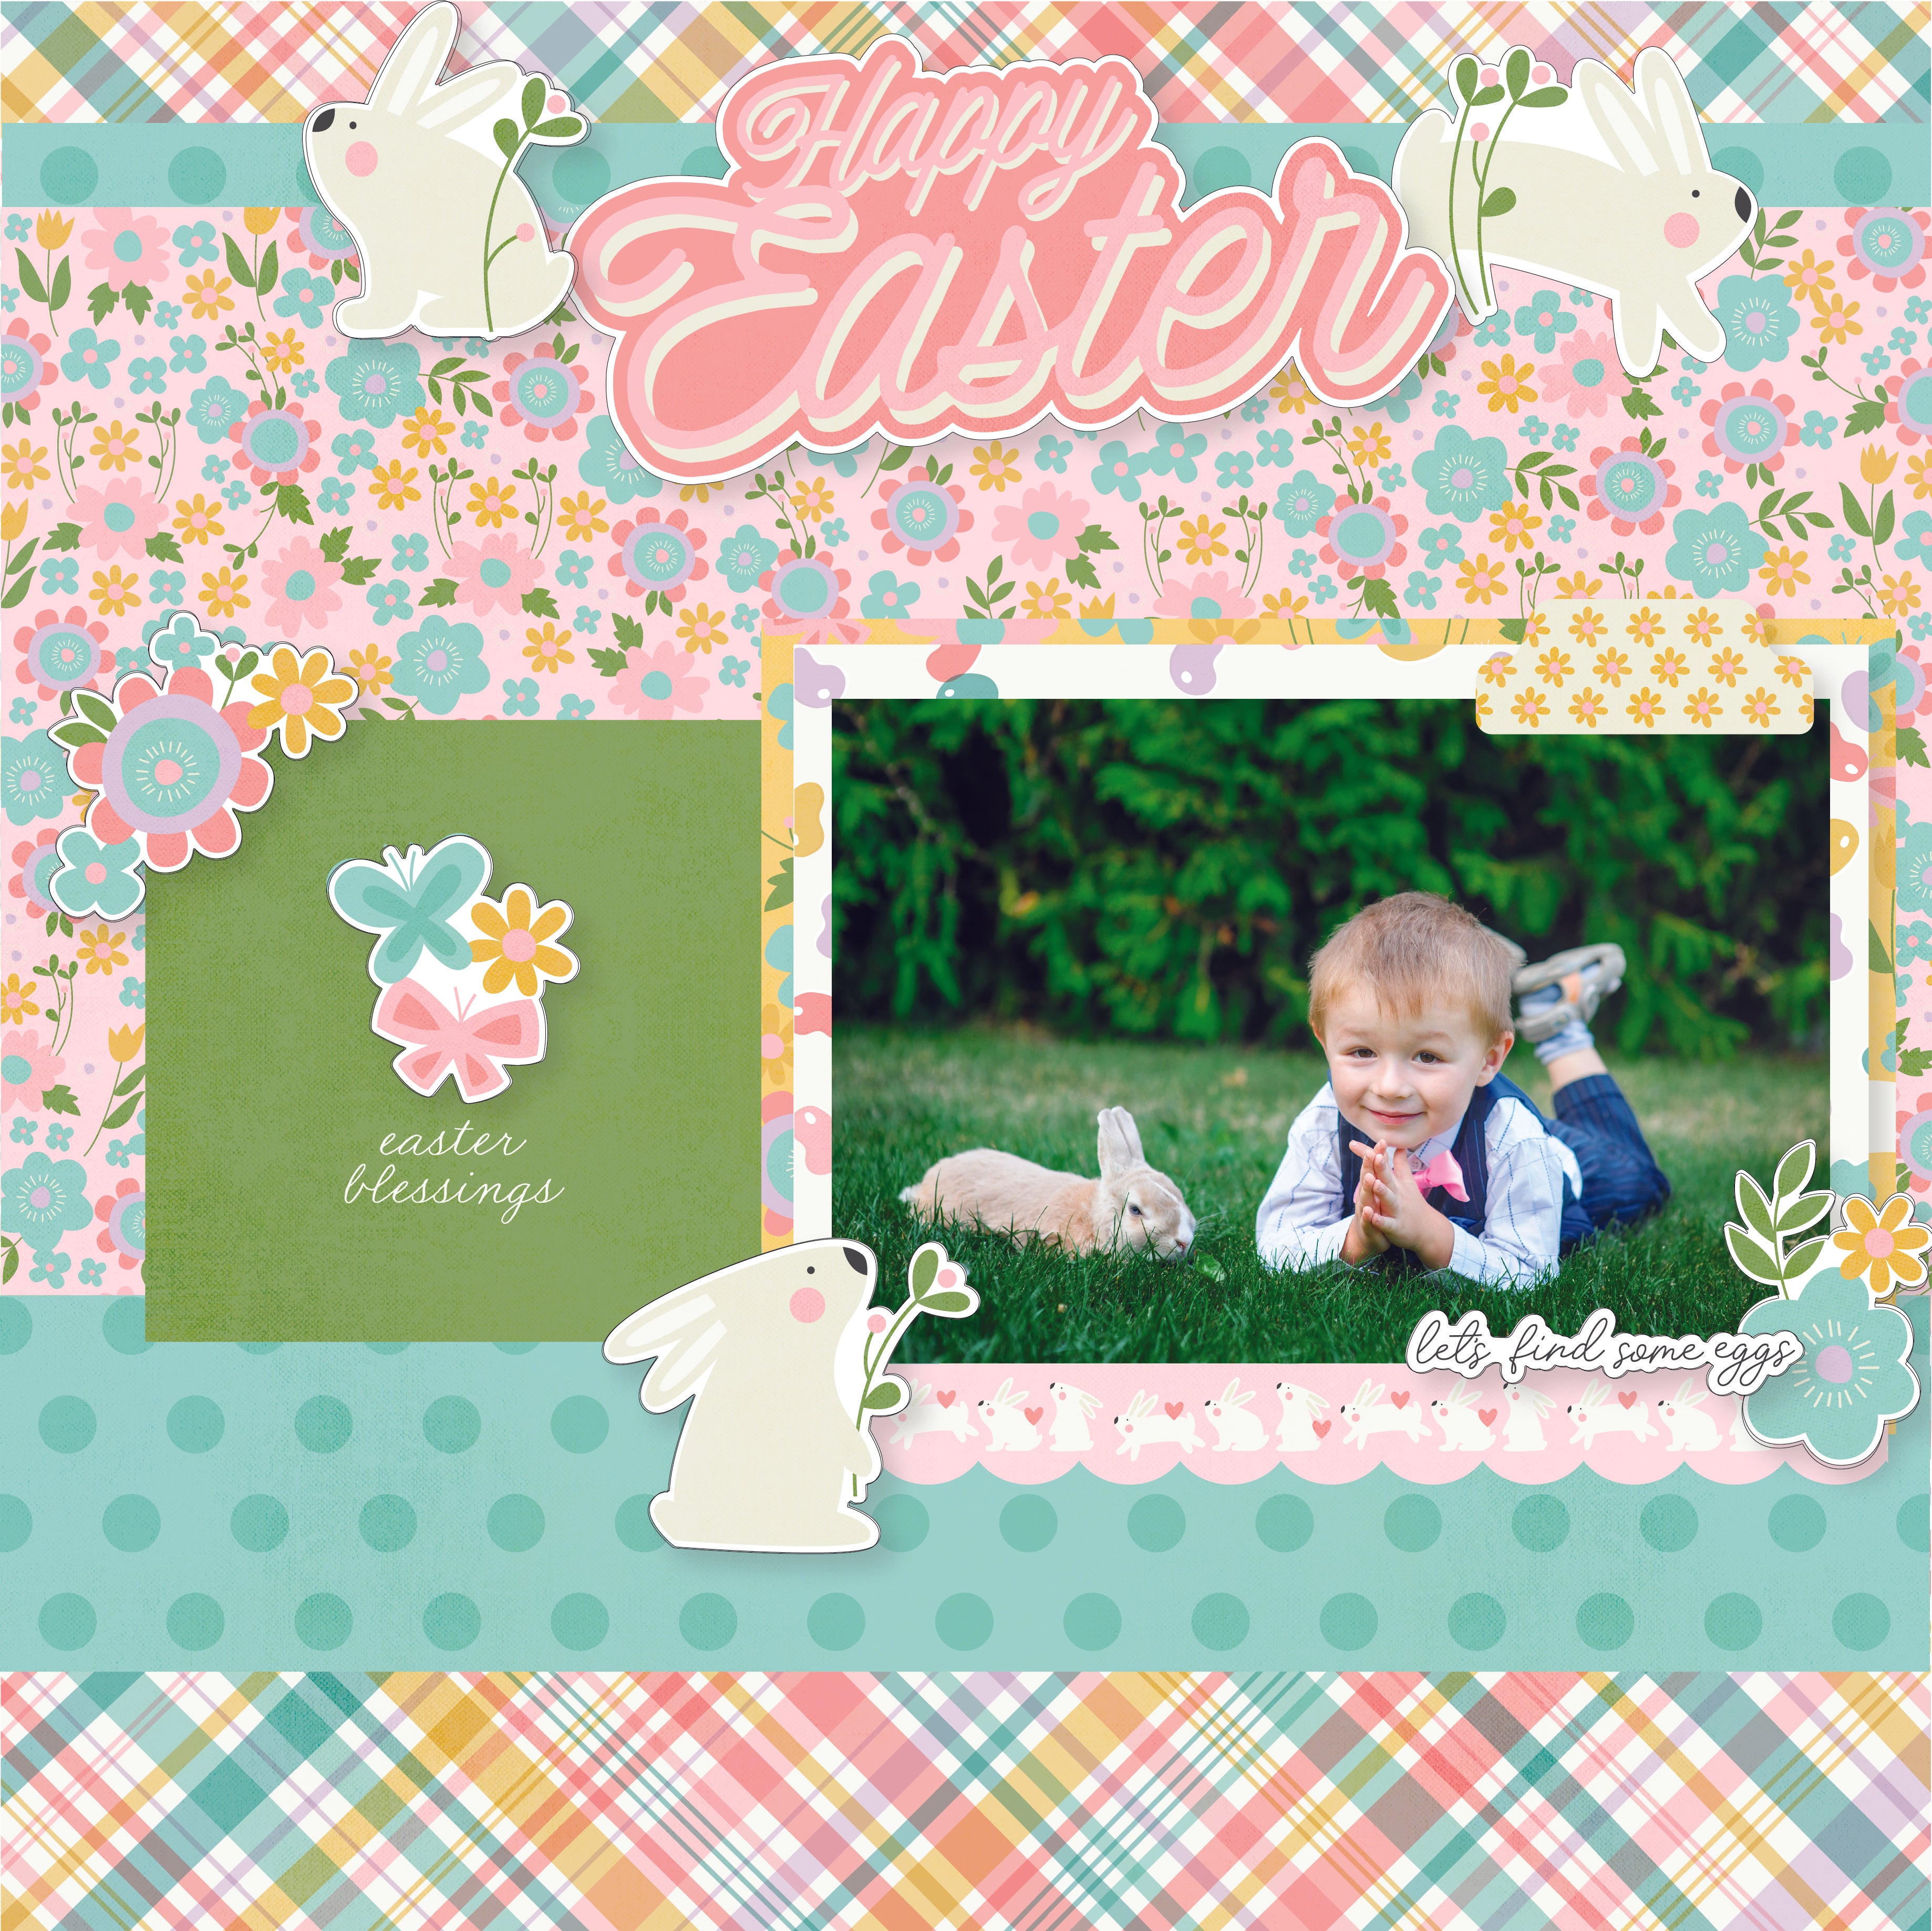 Hoppy Easter Collection Elements 12 x 12 Double-Sided Scrapbook Paper by Simple Stories